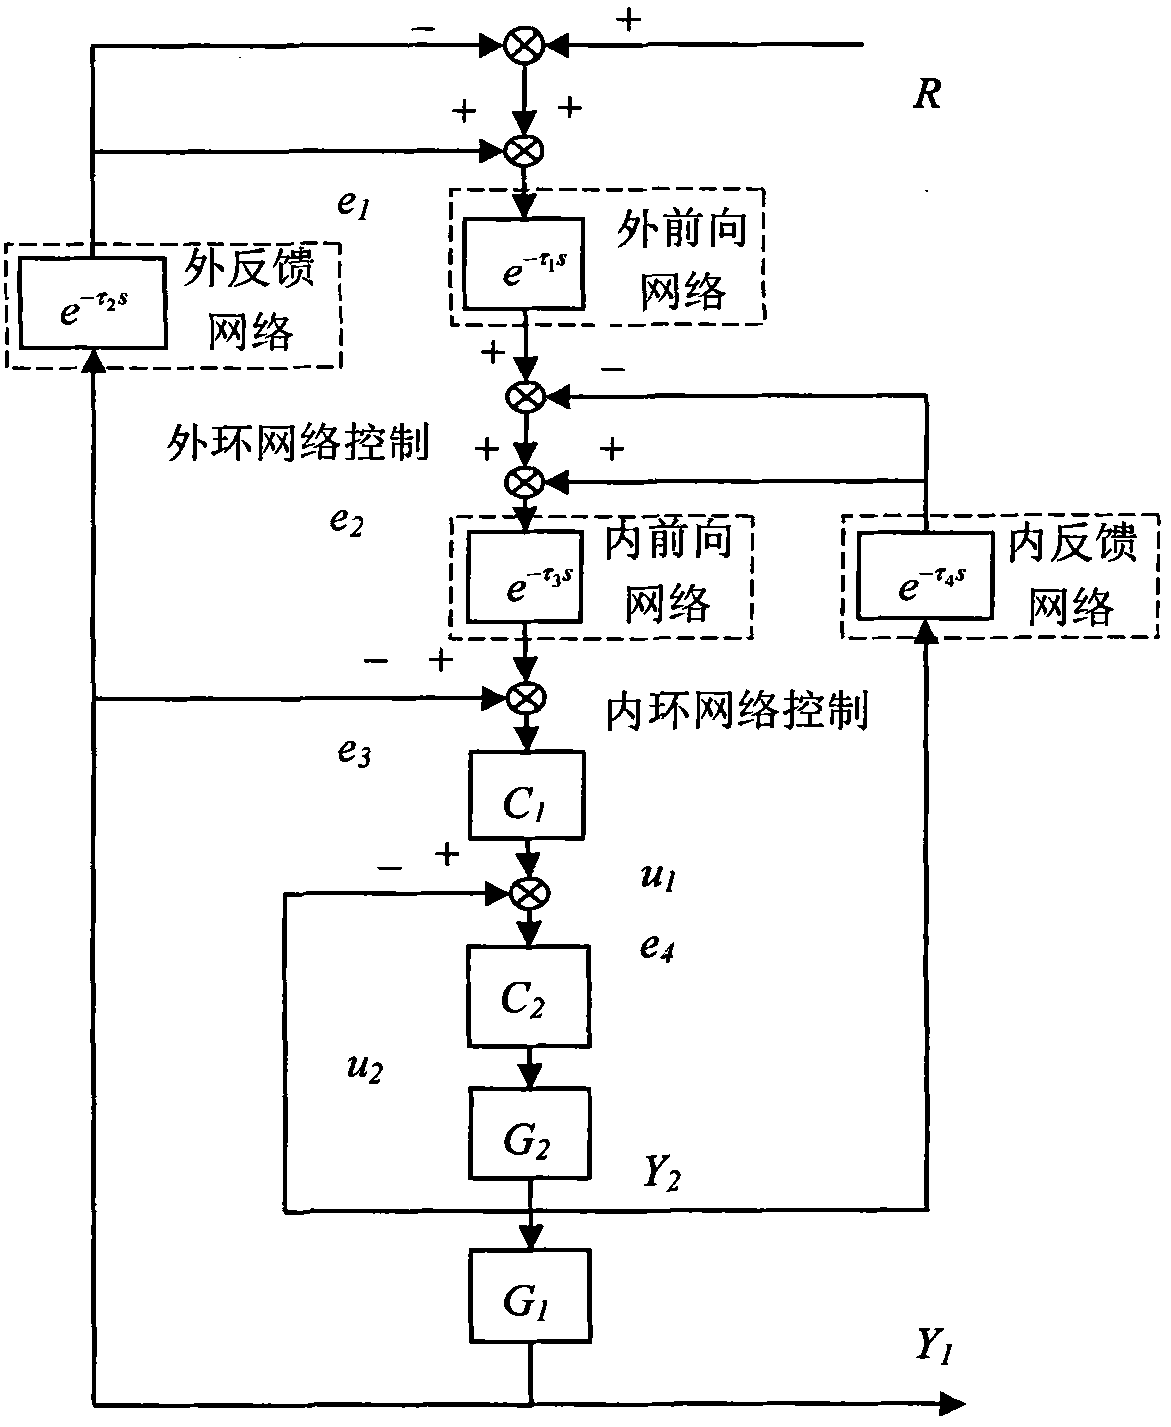 Compensation method for unknown network delay of network cascade control system